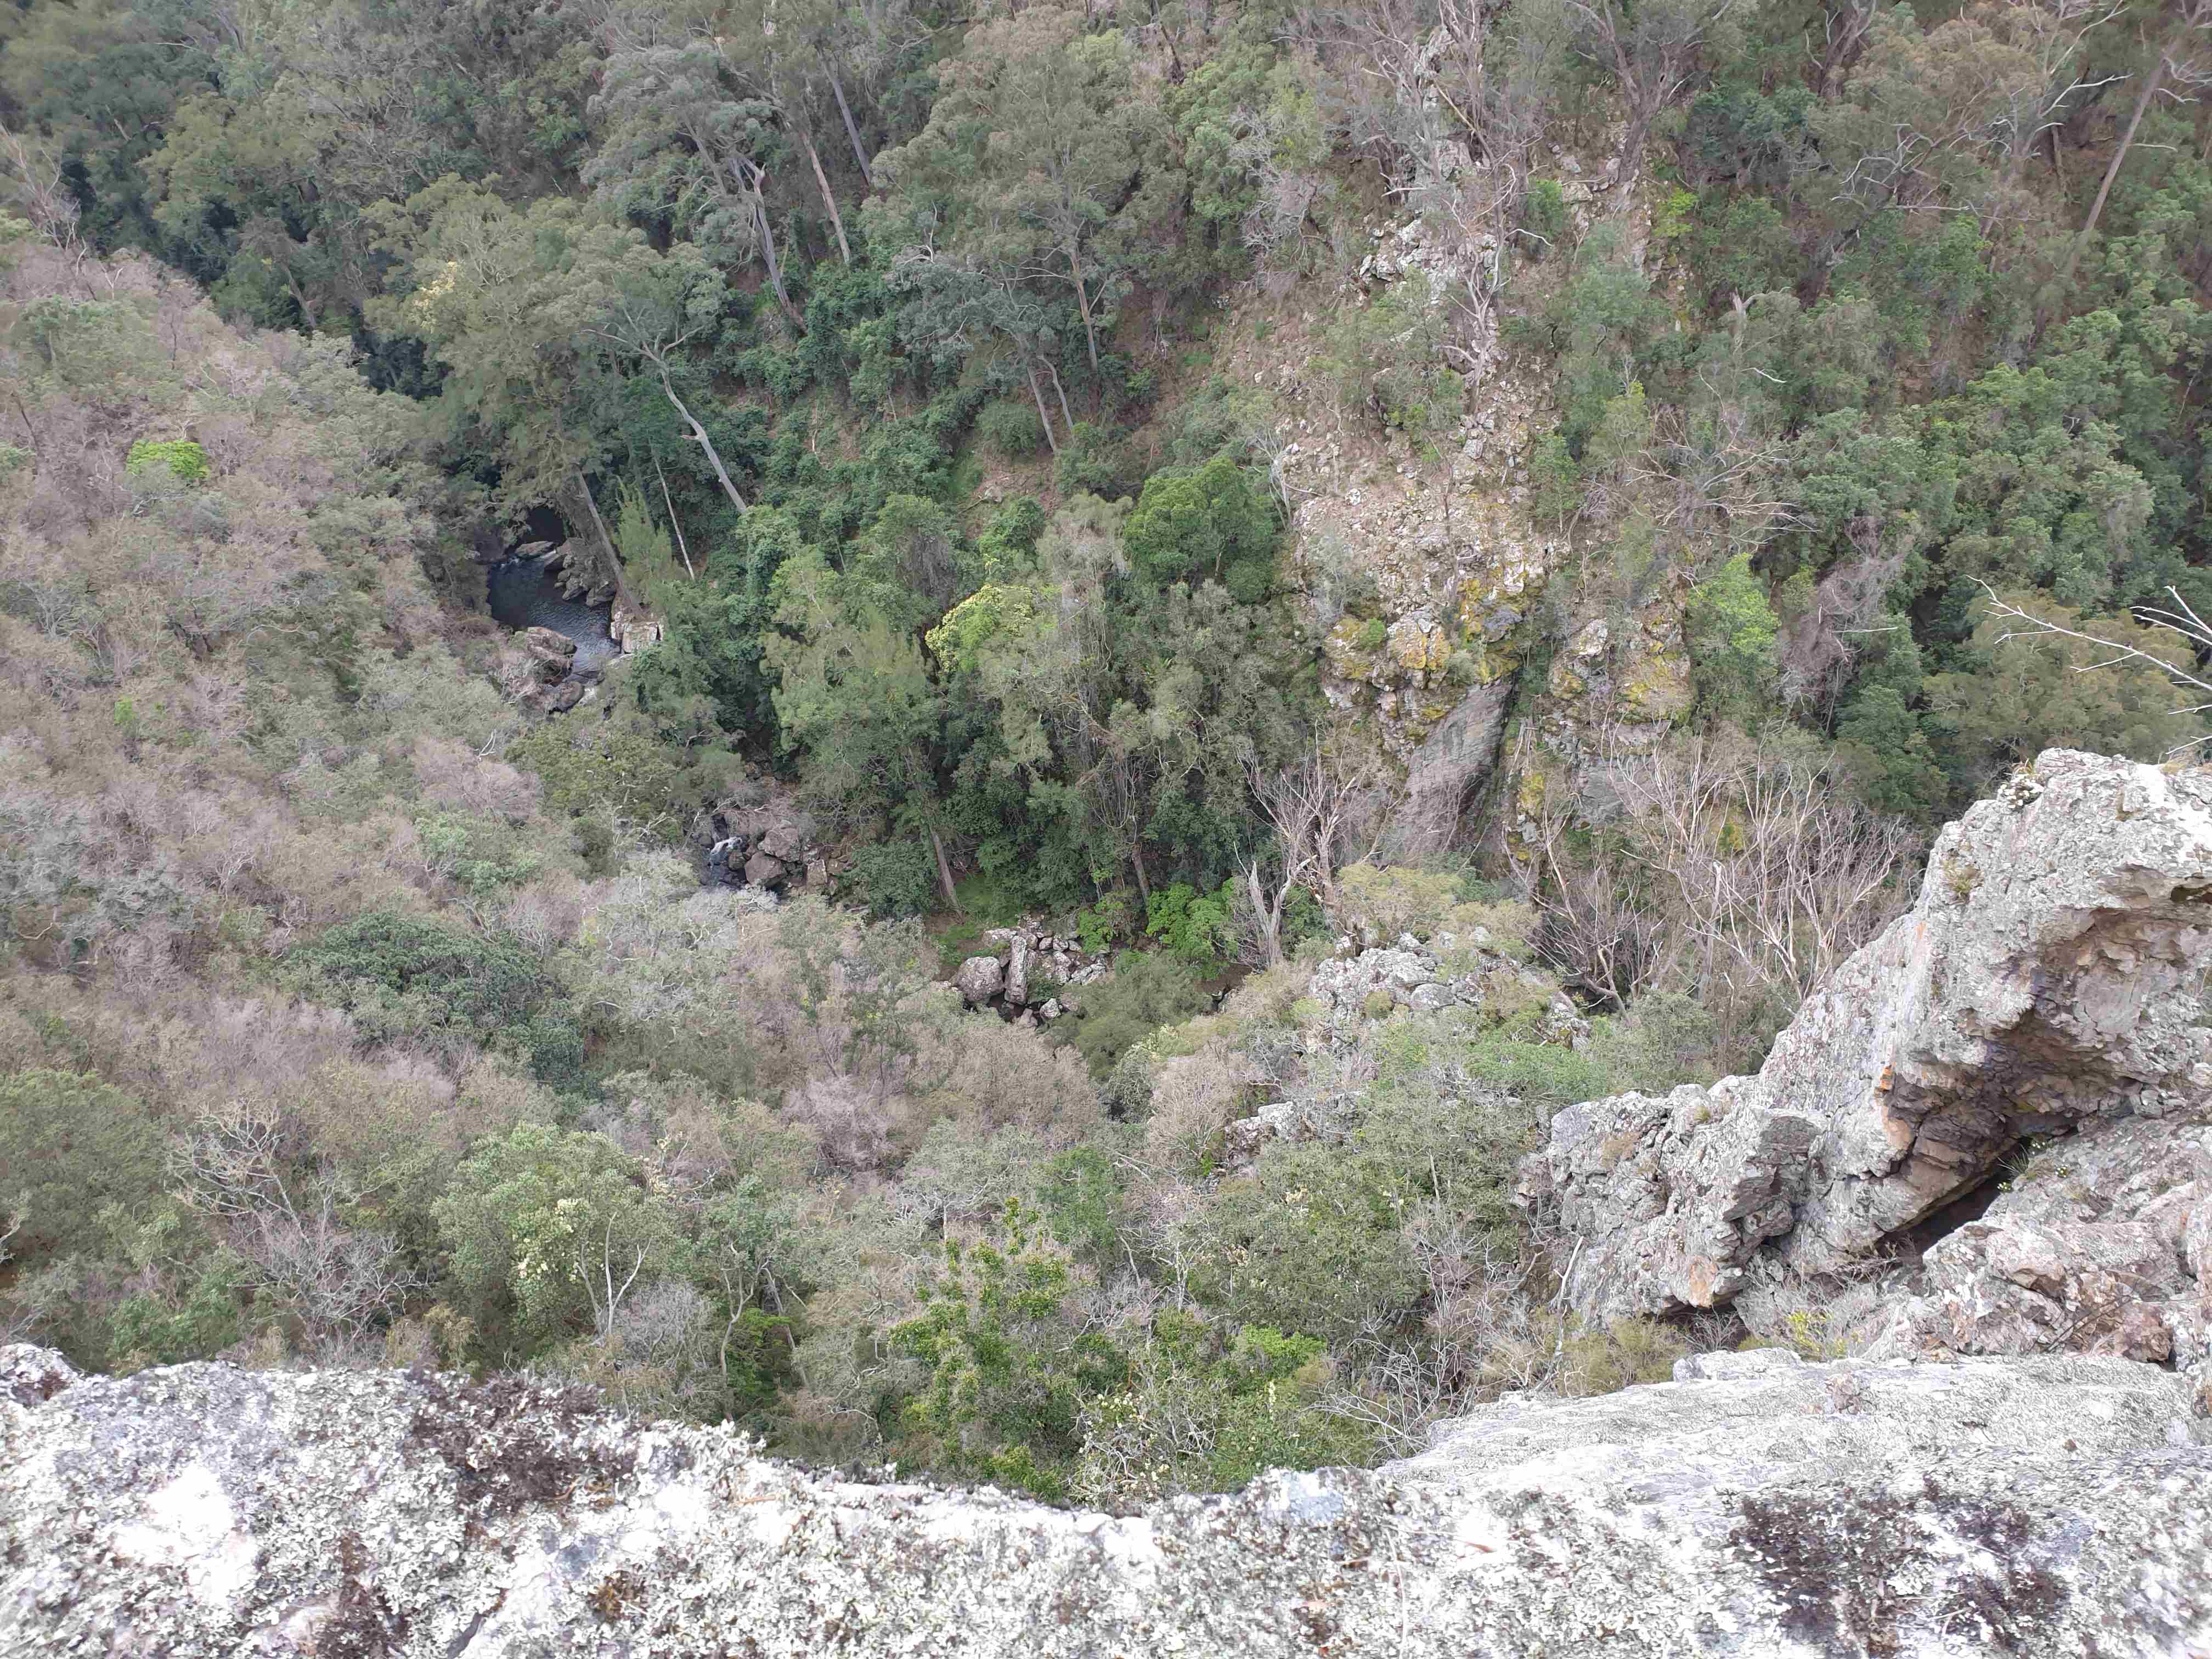 Looking into Myall Creek, view just off the descent spur